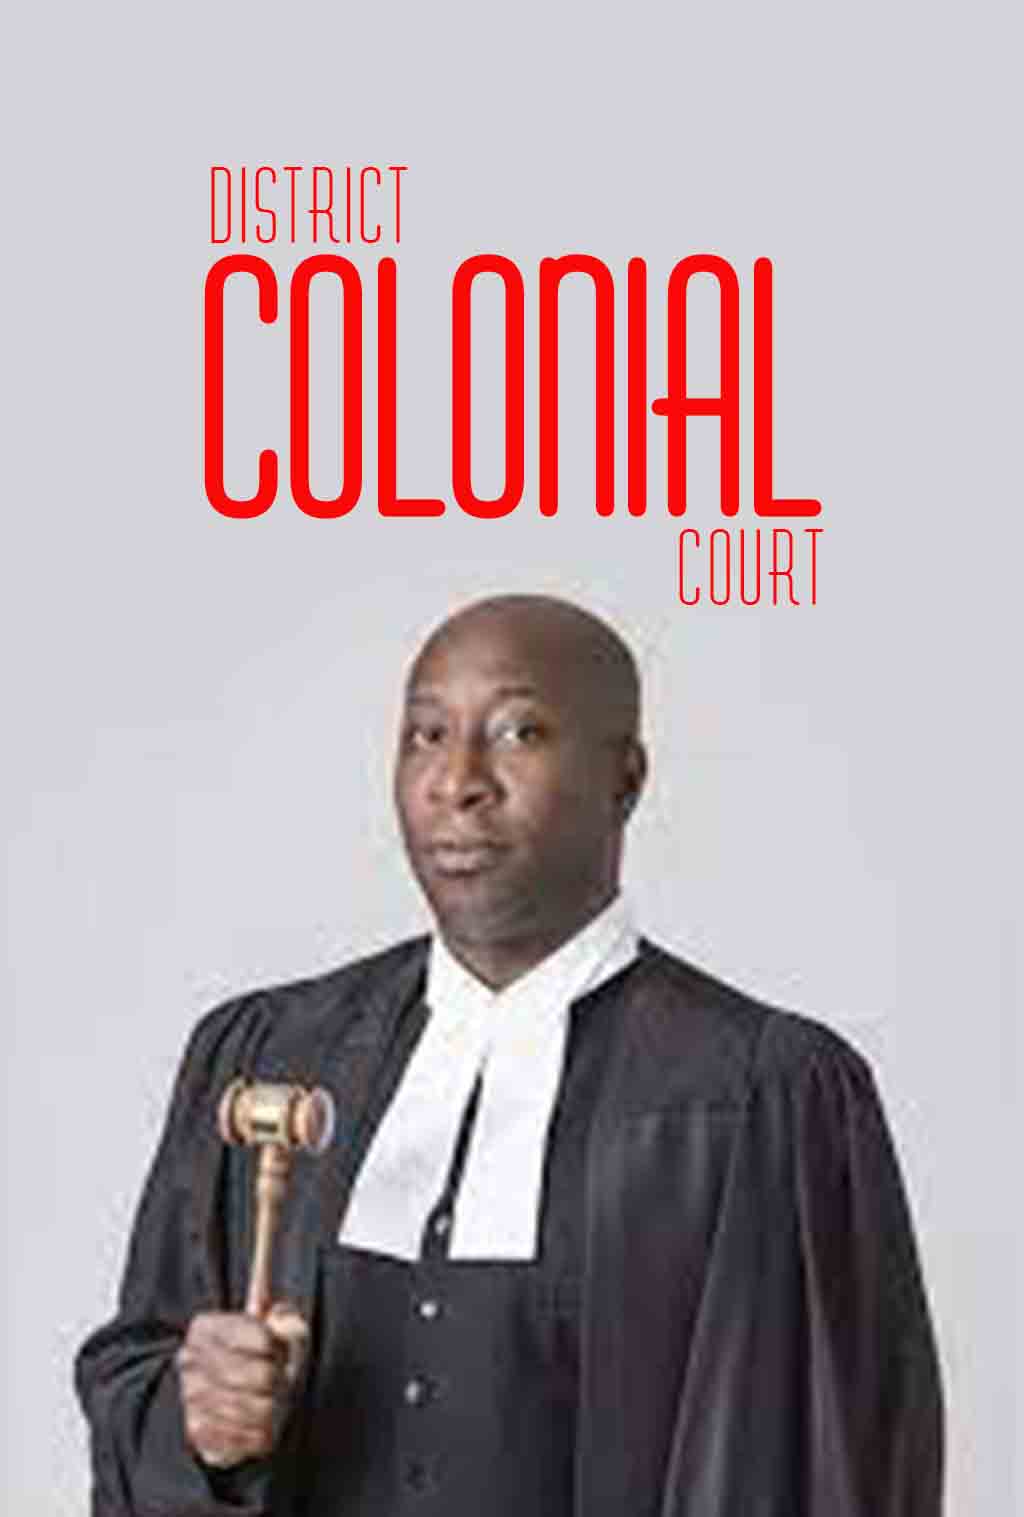 DISTRICT COLONIAL COURT